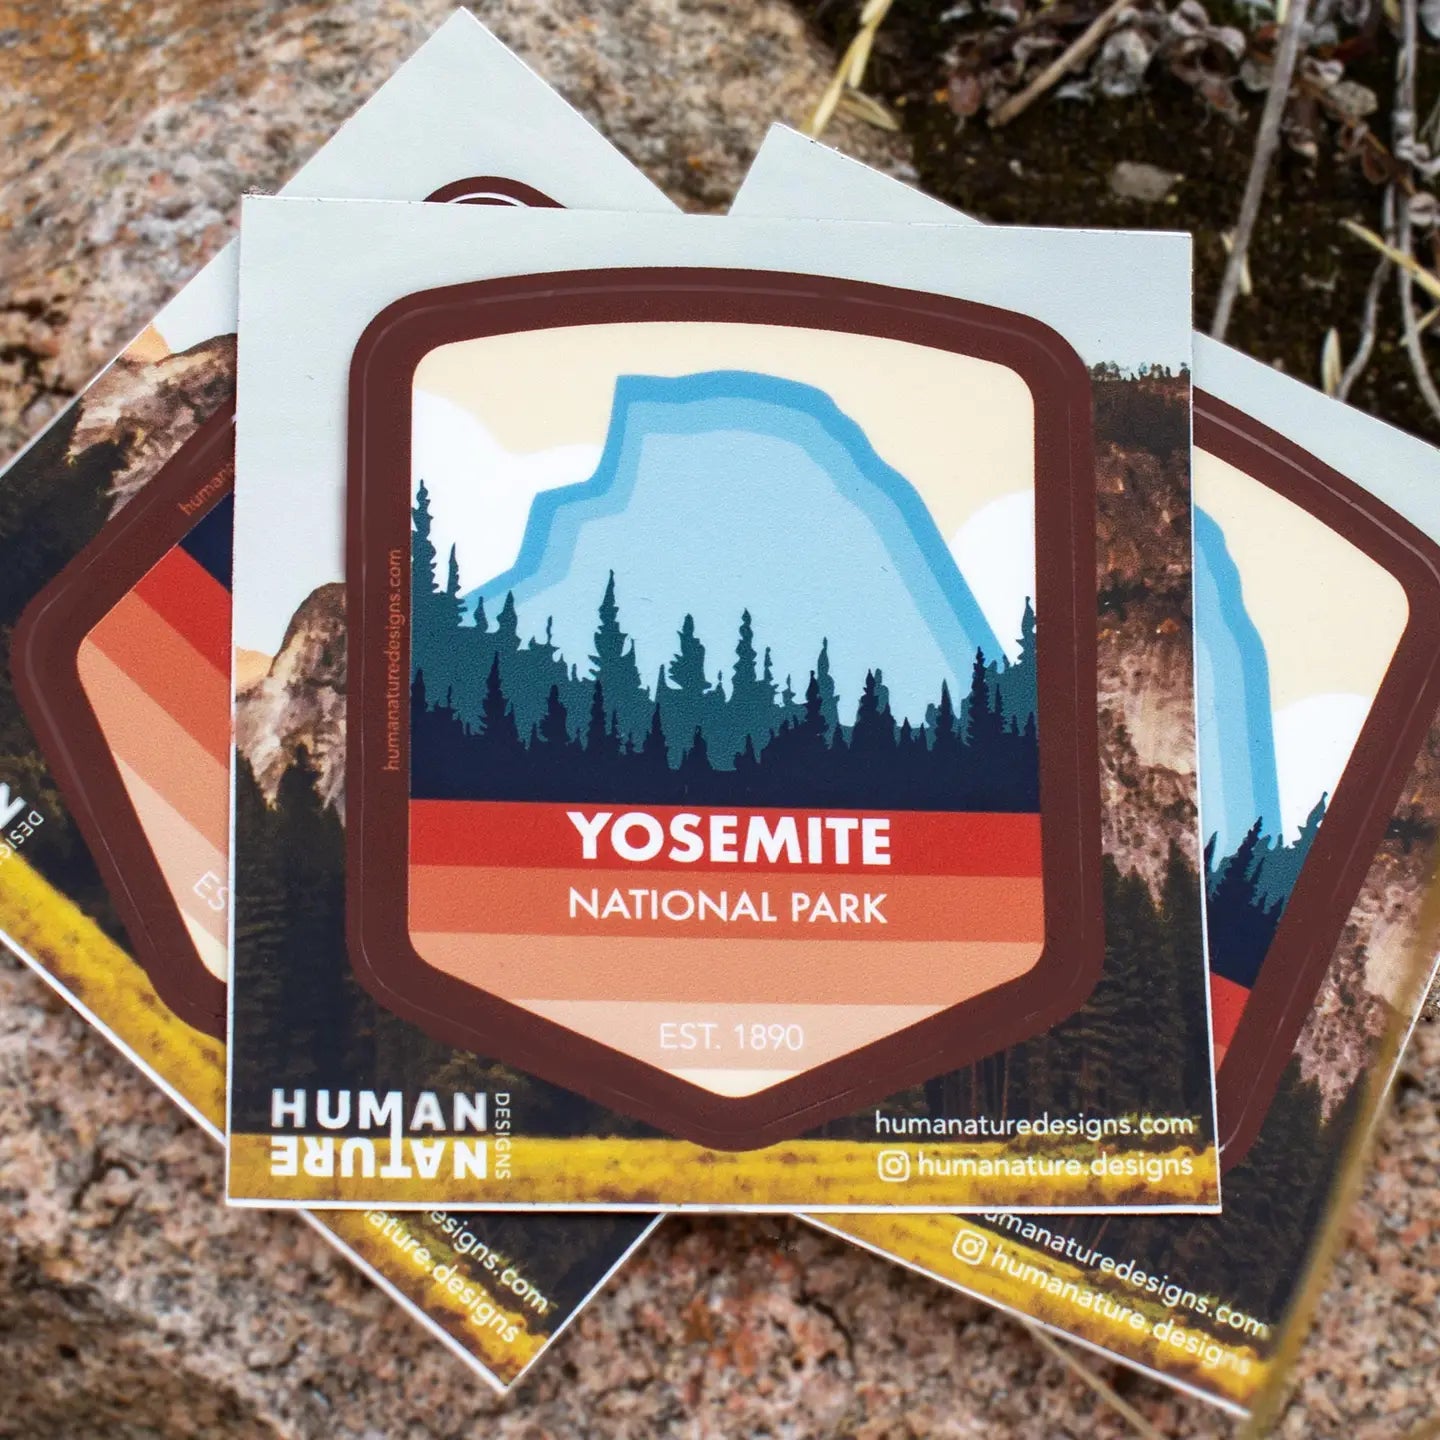 Humans Need Nature Sticker Collection